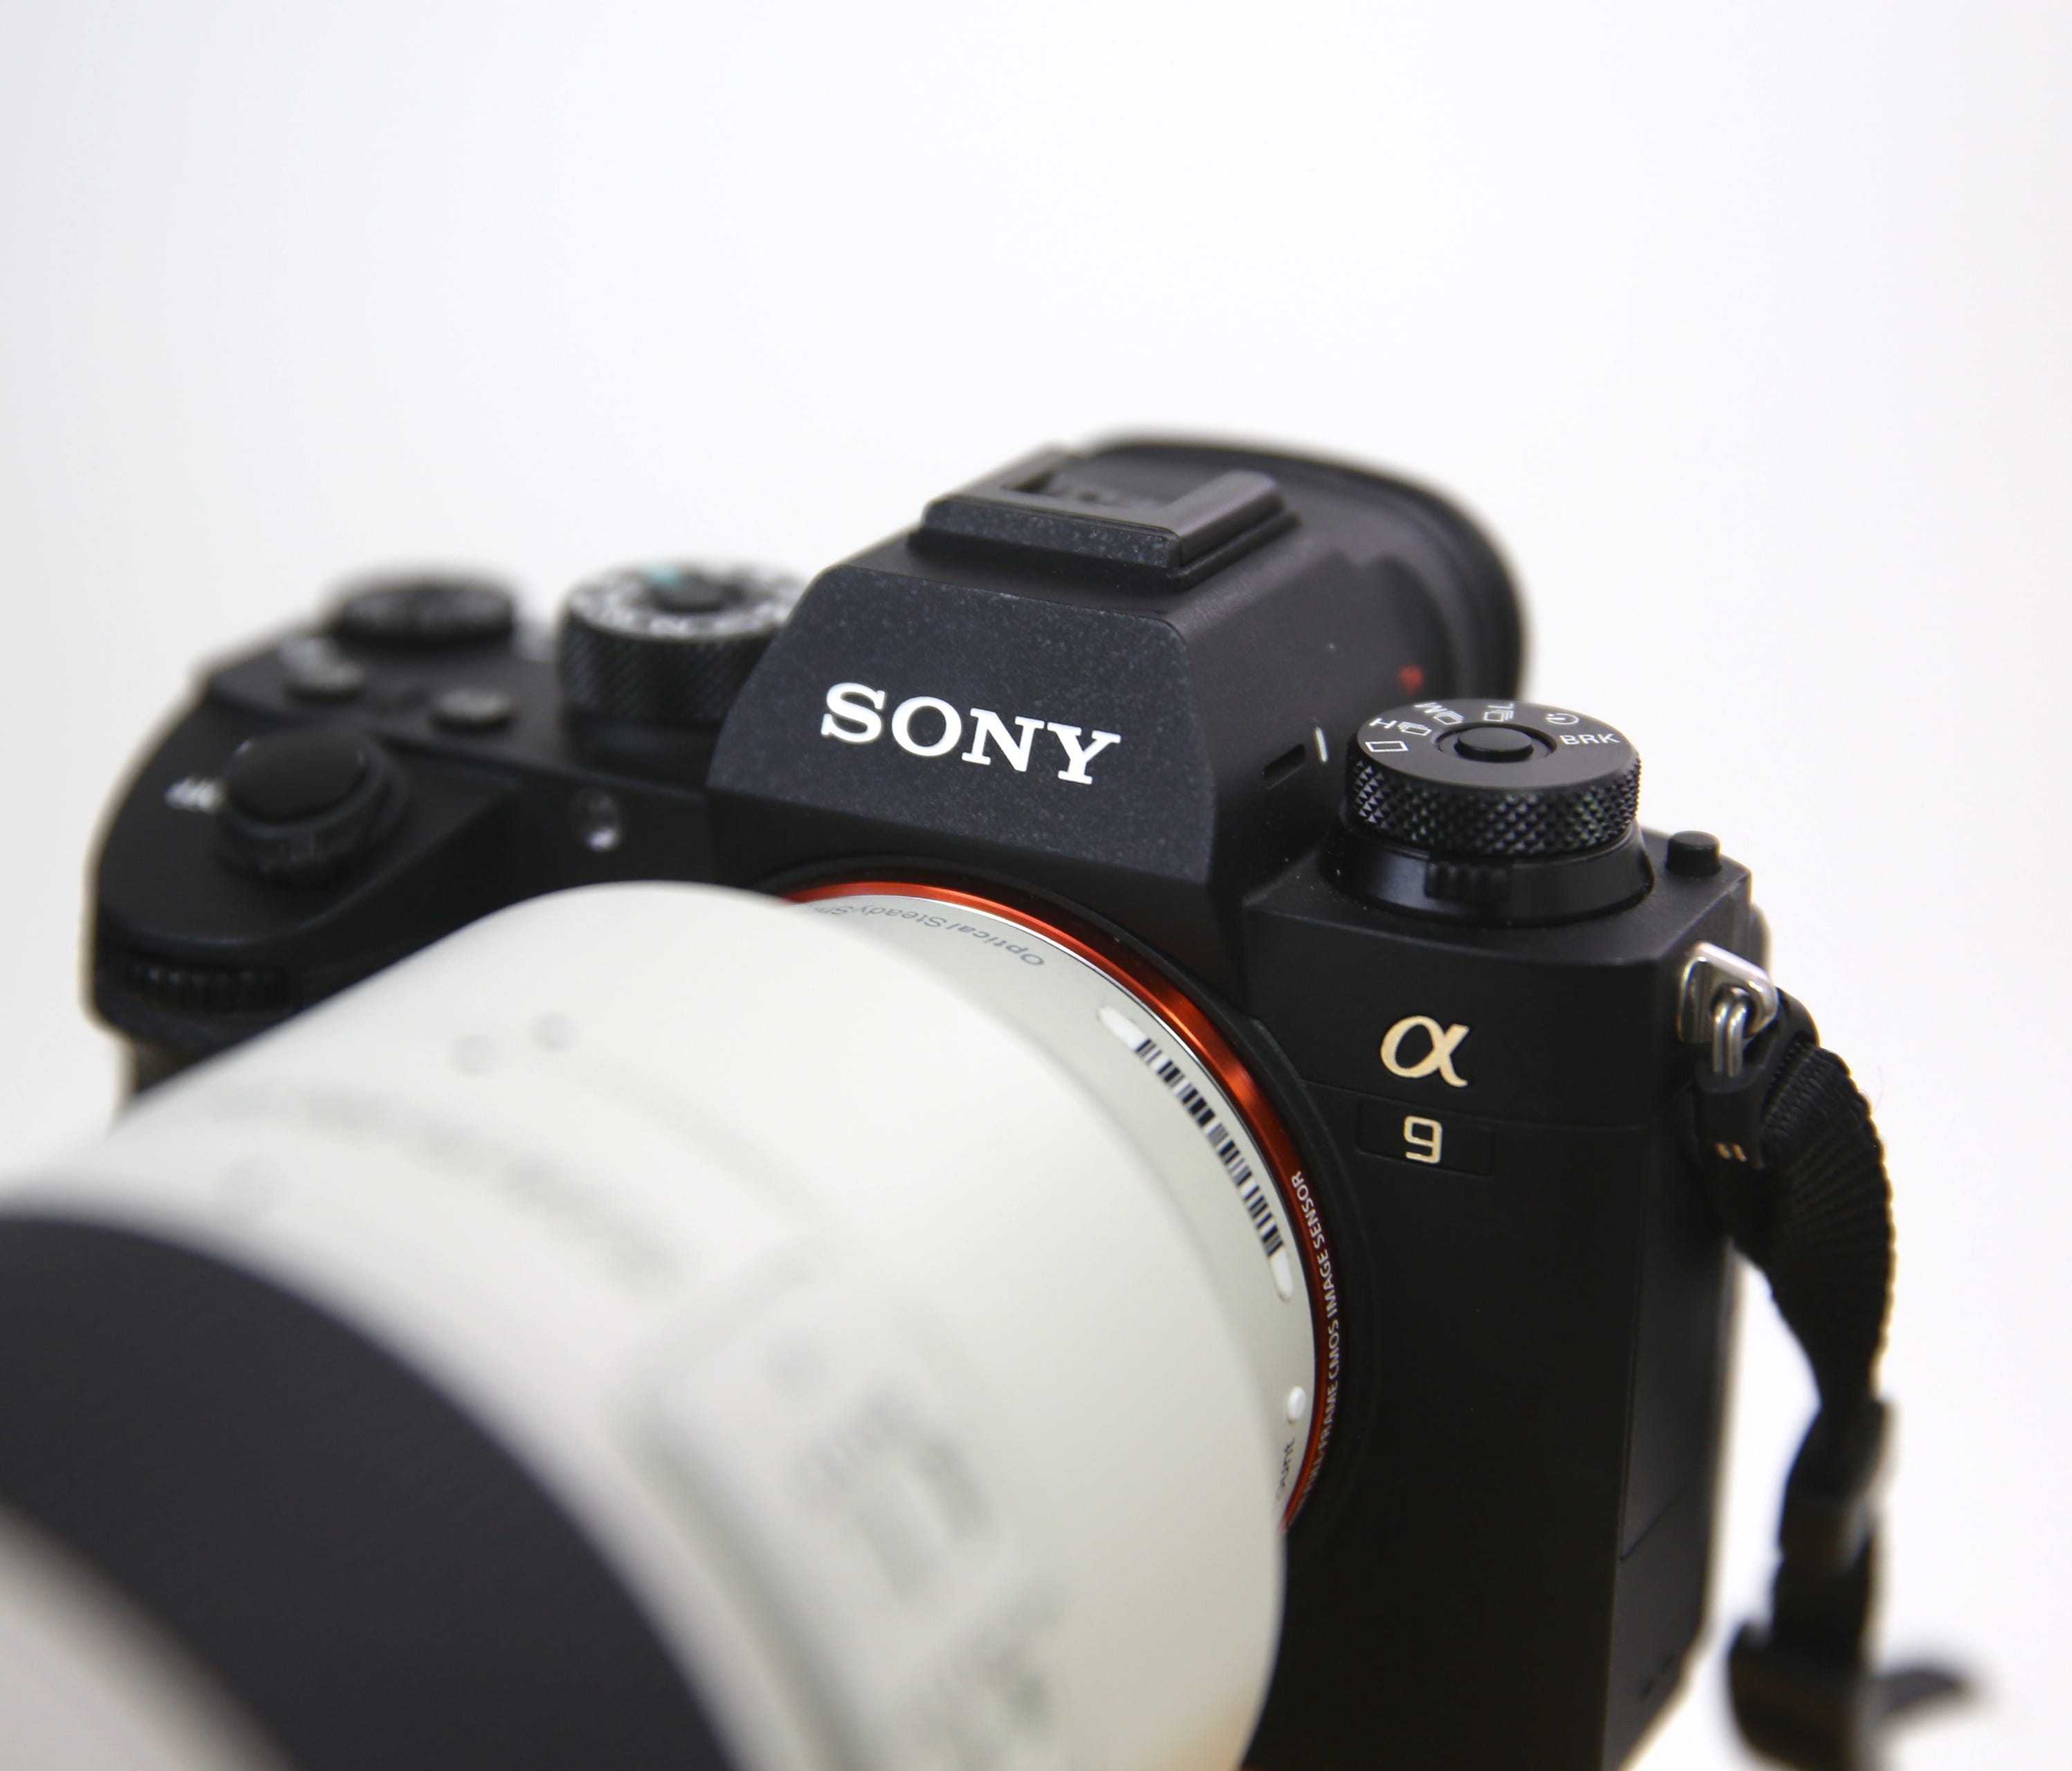 The Sony A9 camera shoots 20 frames a second. Seen here with 70-200mm lens.